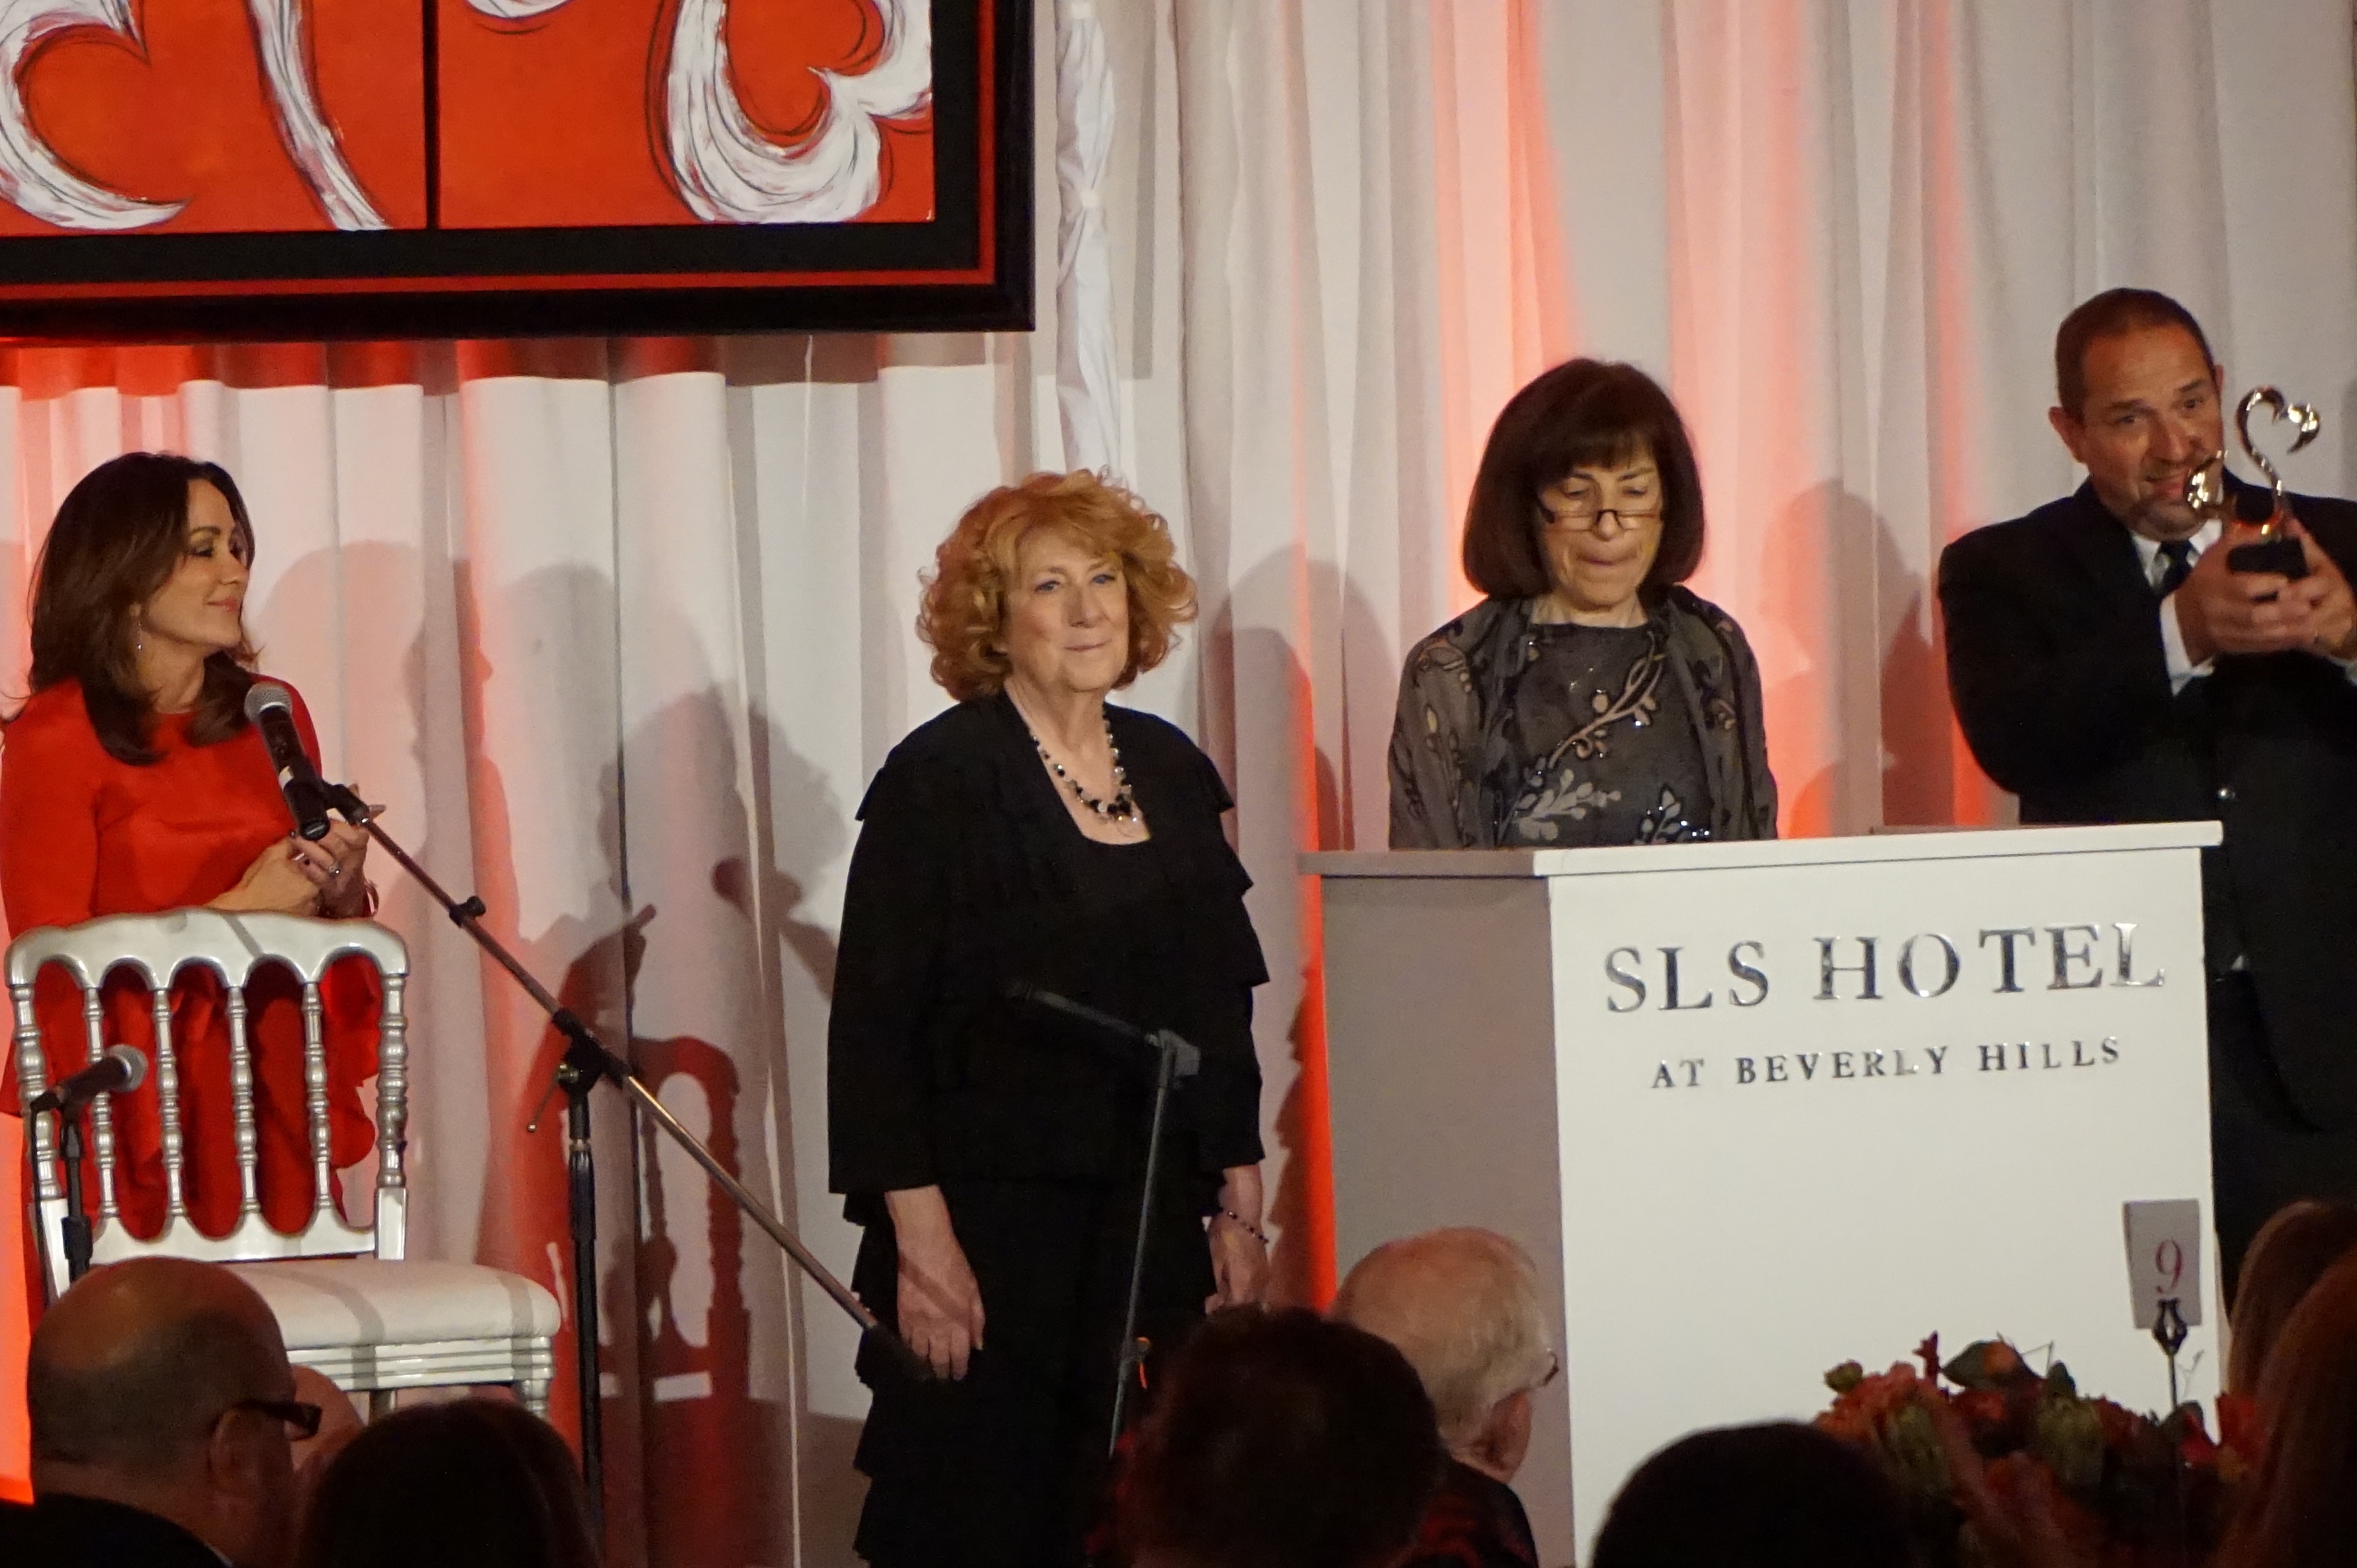 Patricia Heaton, left, presents Open Hearts award to Exceptional Minds co-founders Ernie Merlán, Yudi Bennett and Susan Zwerman.